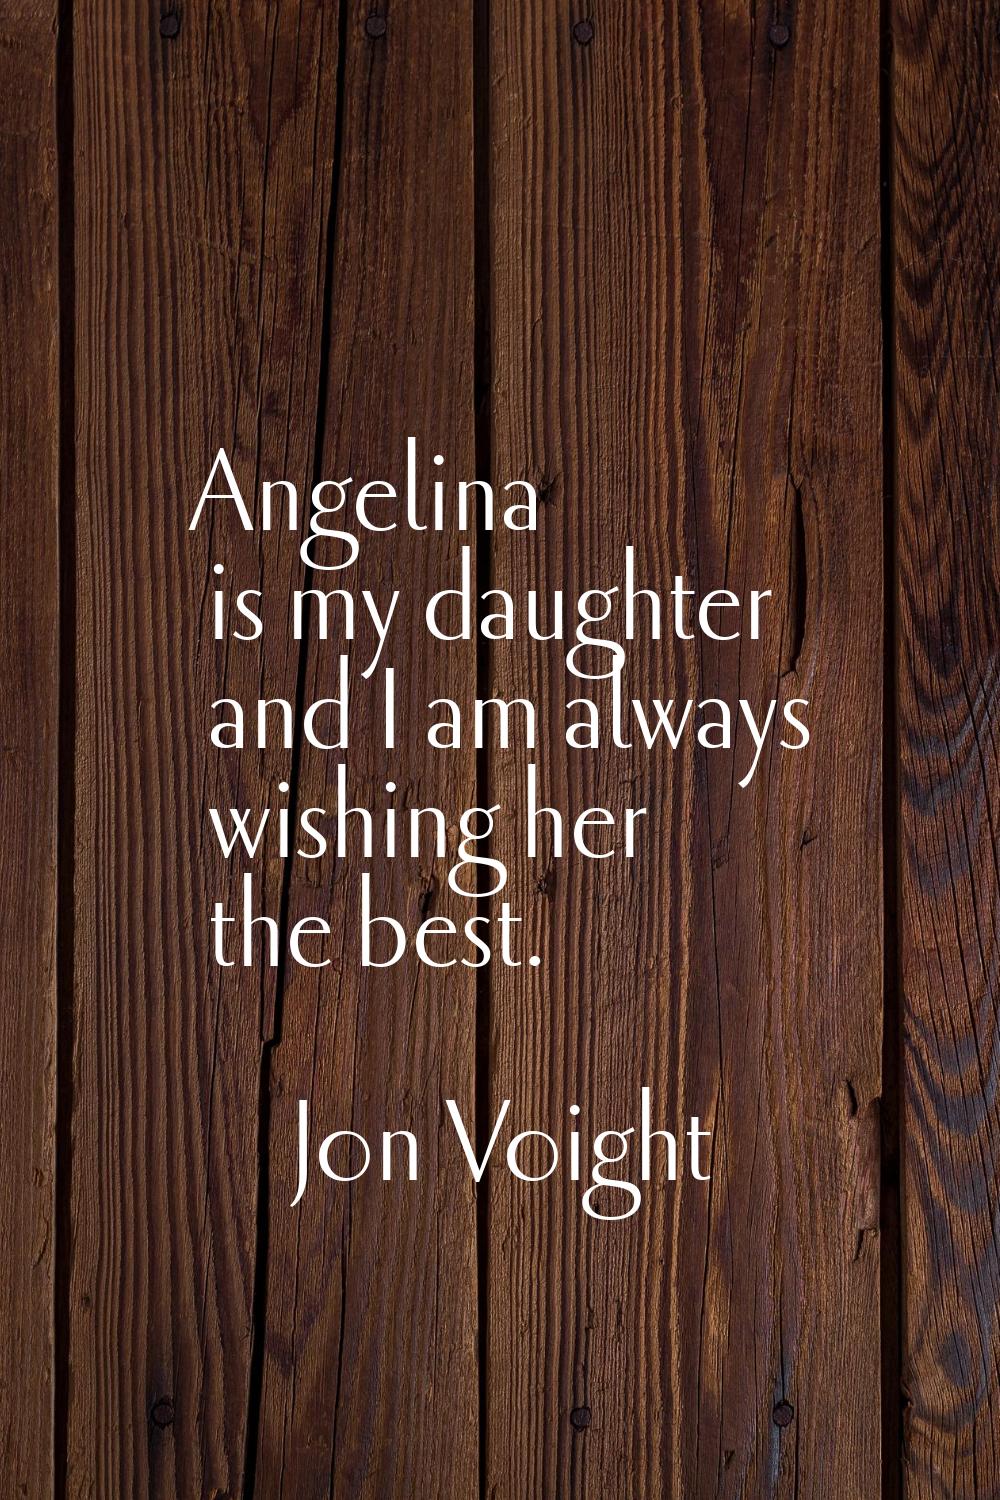 Angelina is my daughter and I am always wishing her the best.